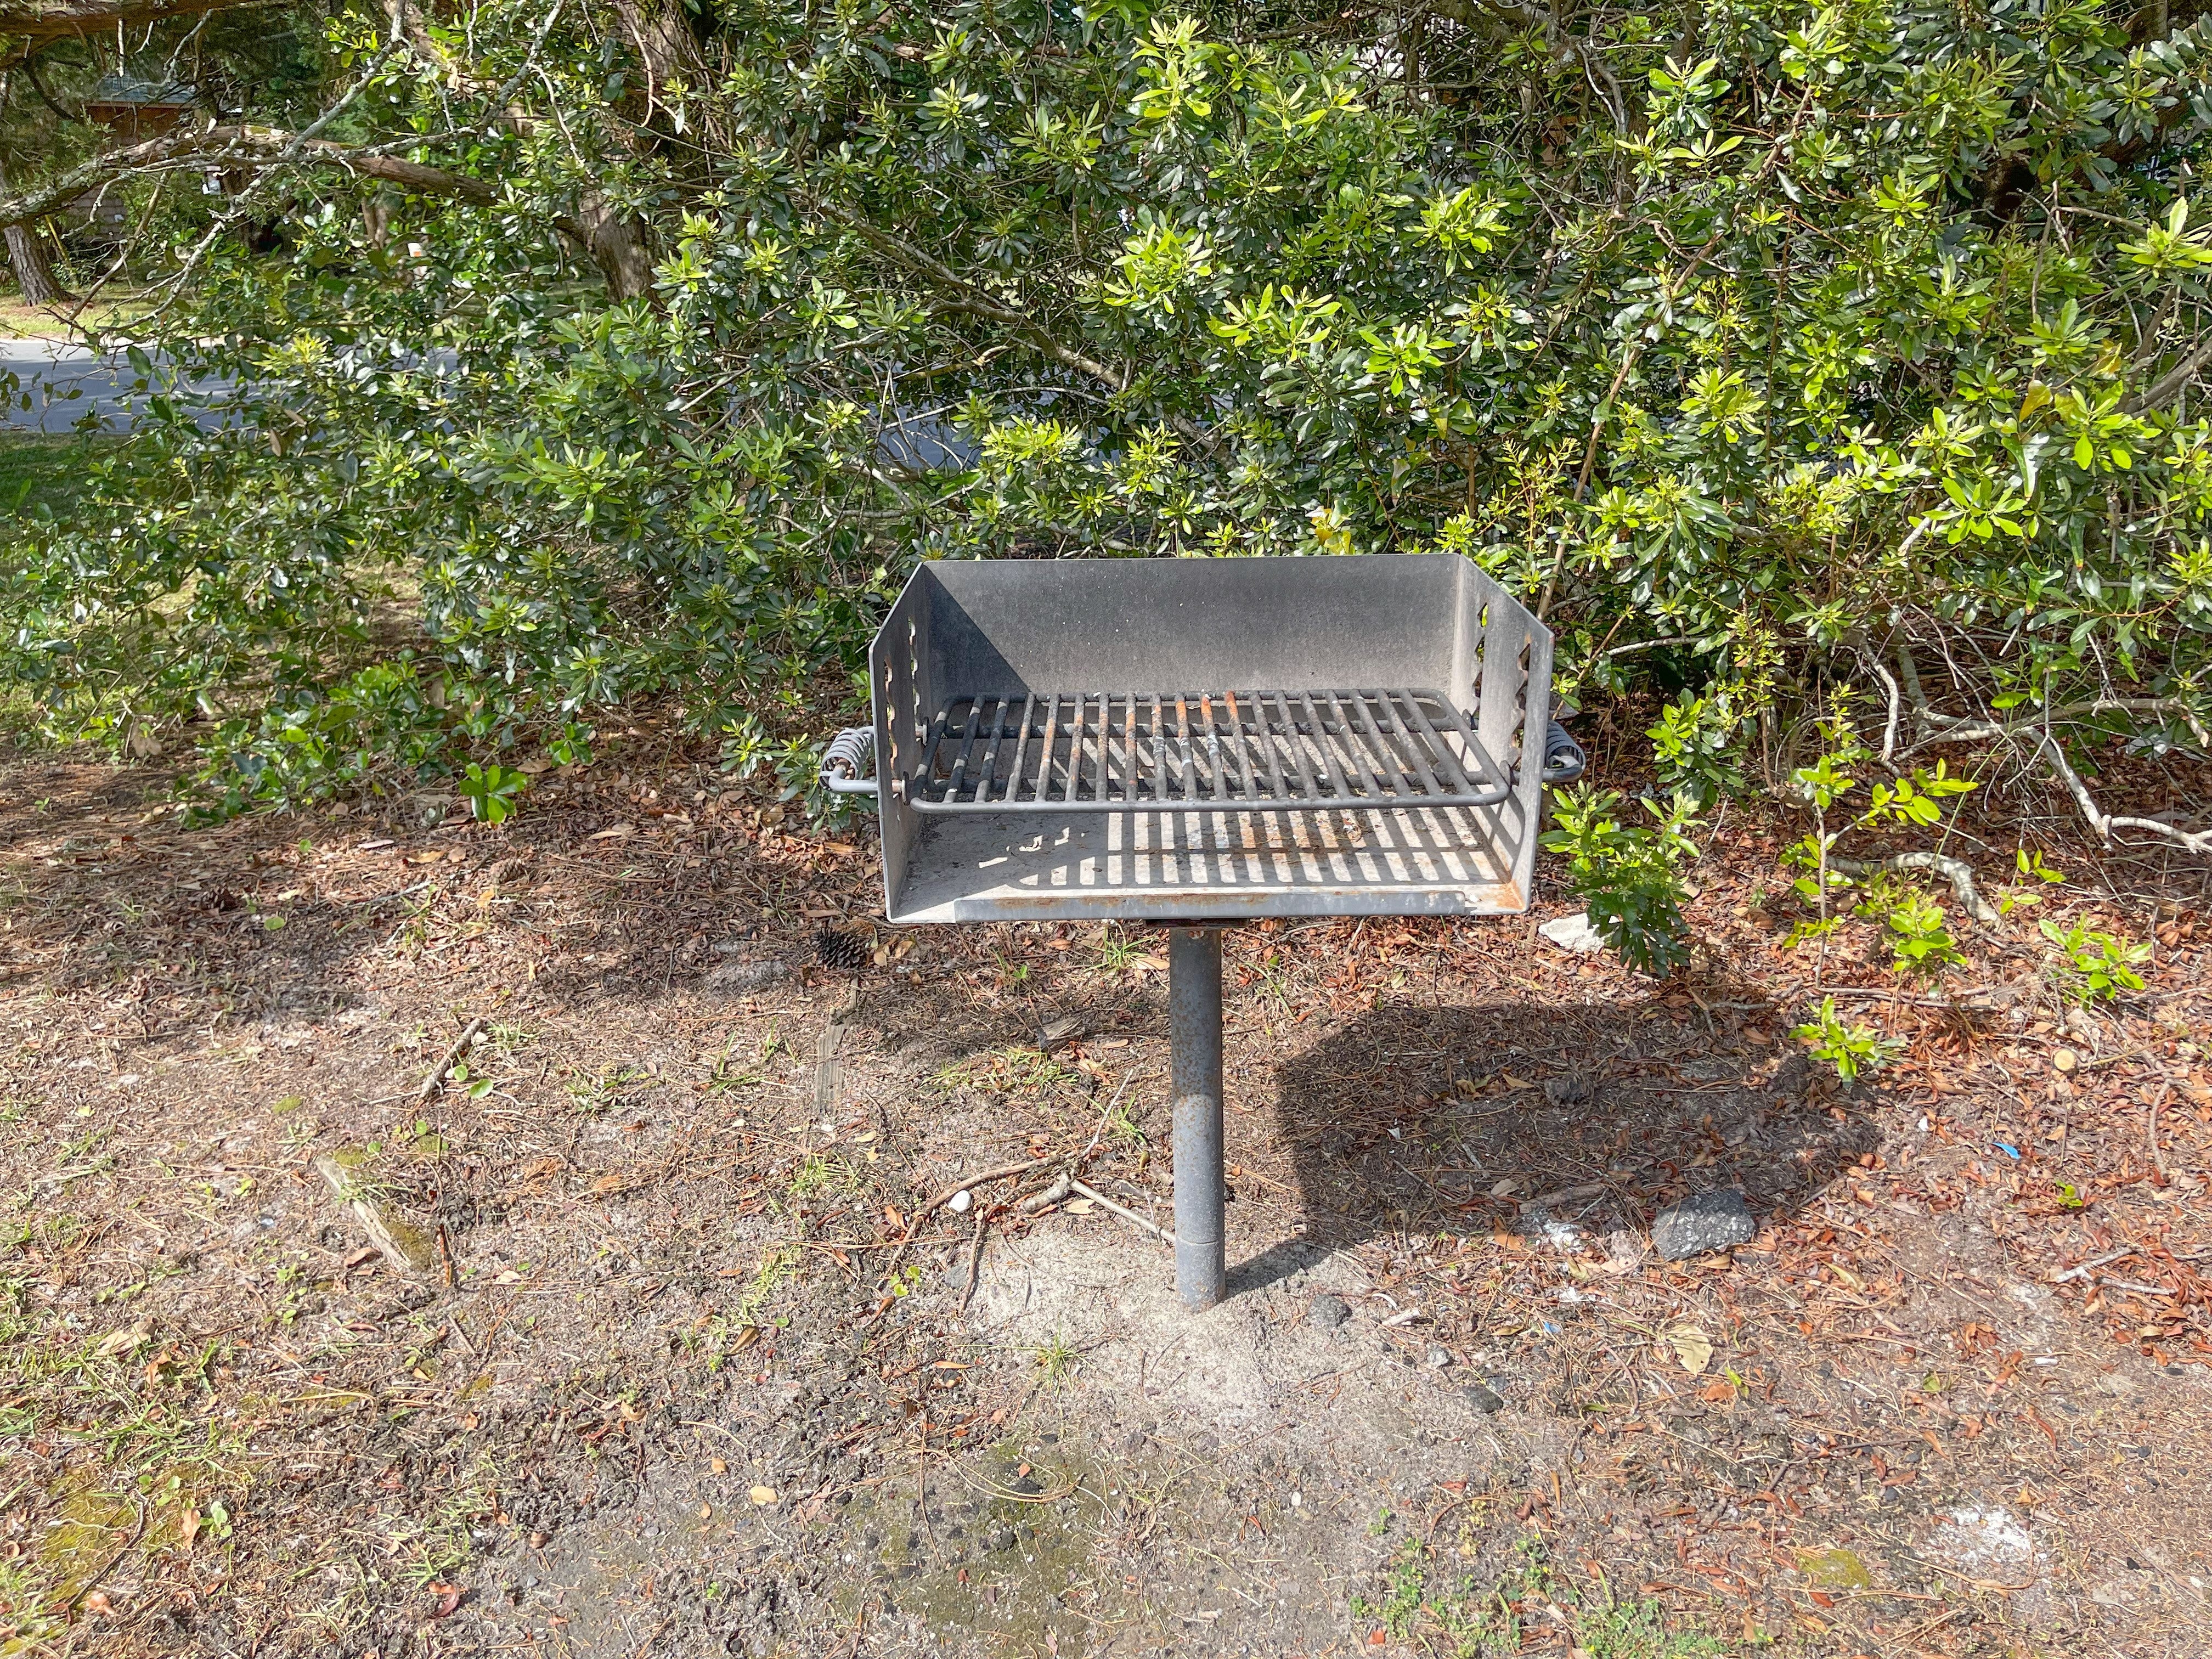 Park Style Charcoal Grill